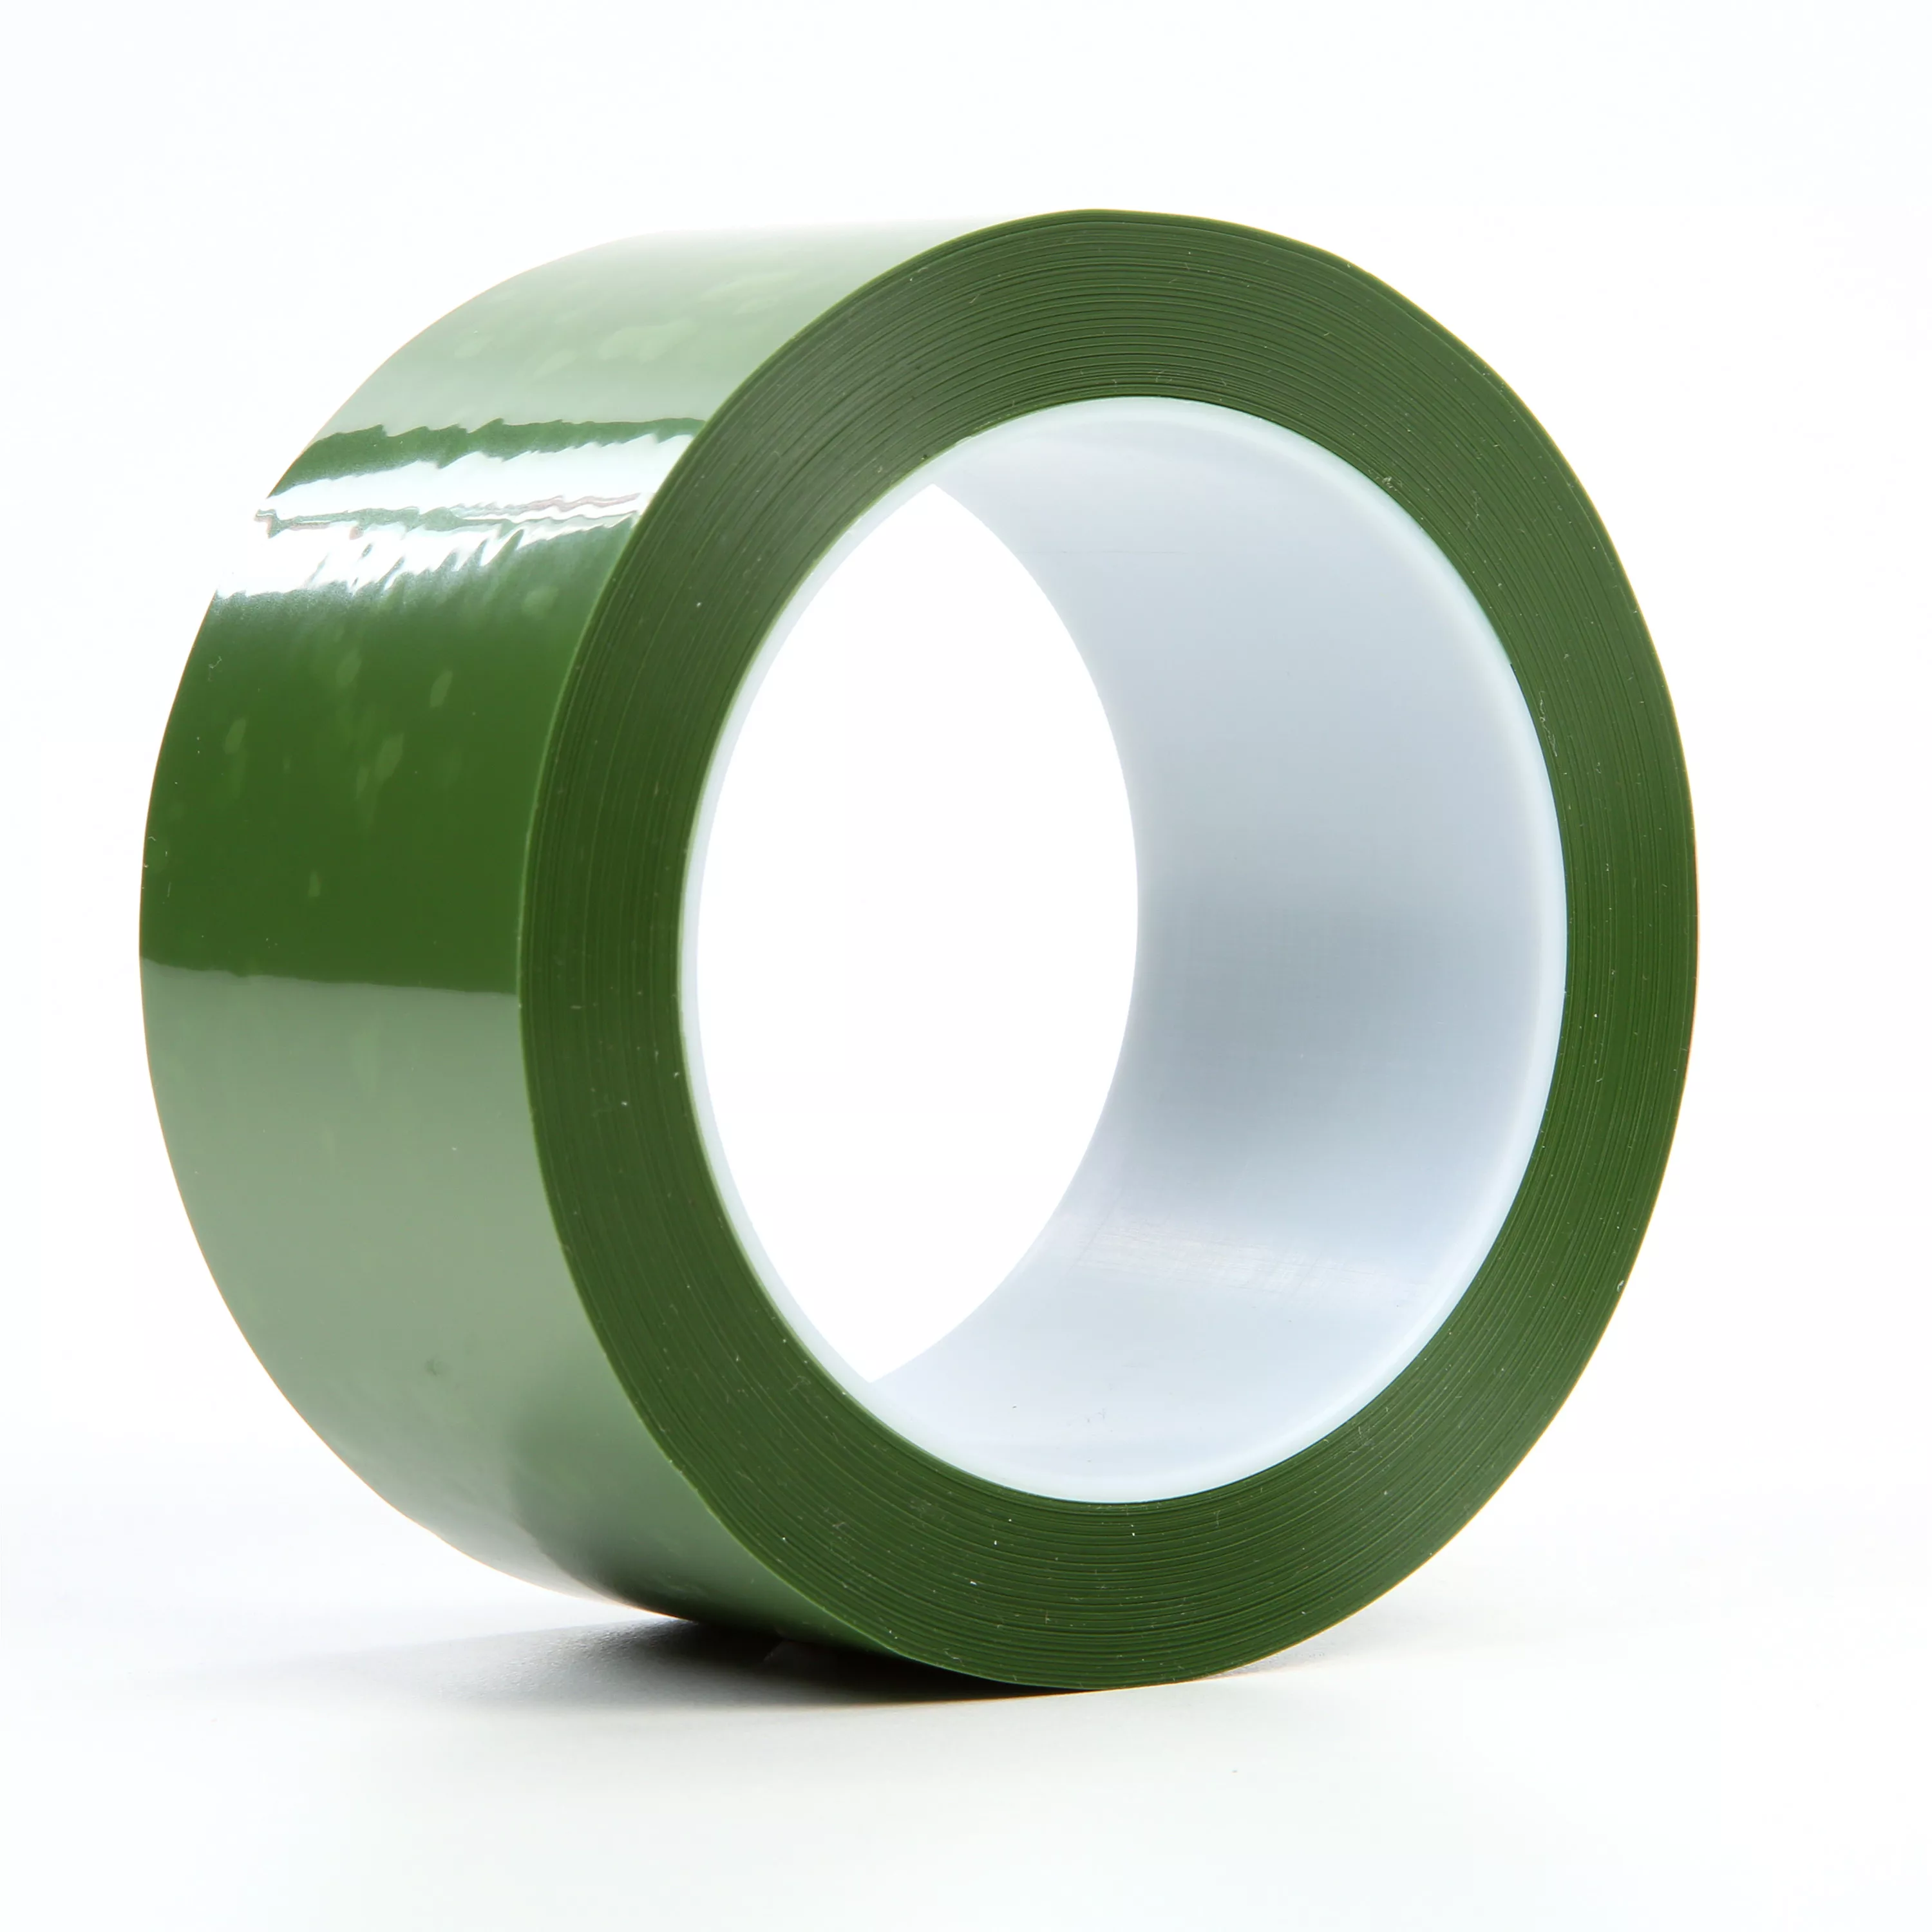 3M™ Polyester Tape 8403, Green, 2 in x 72 yd, 2.4 mil, 24 Roll/Case